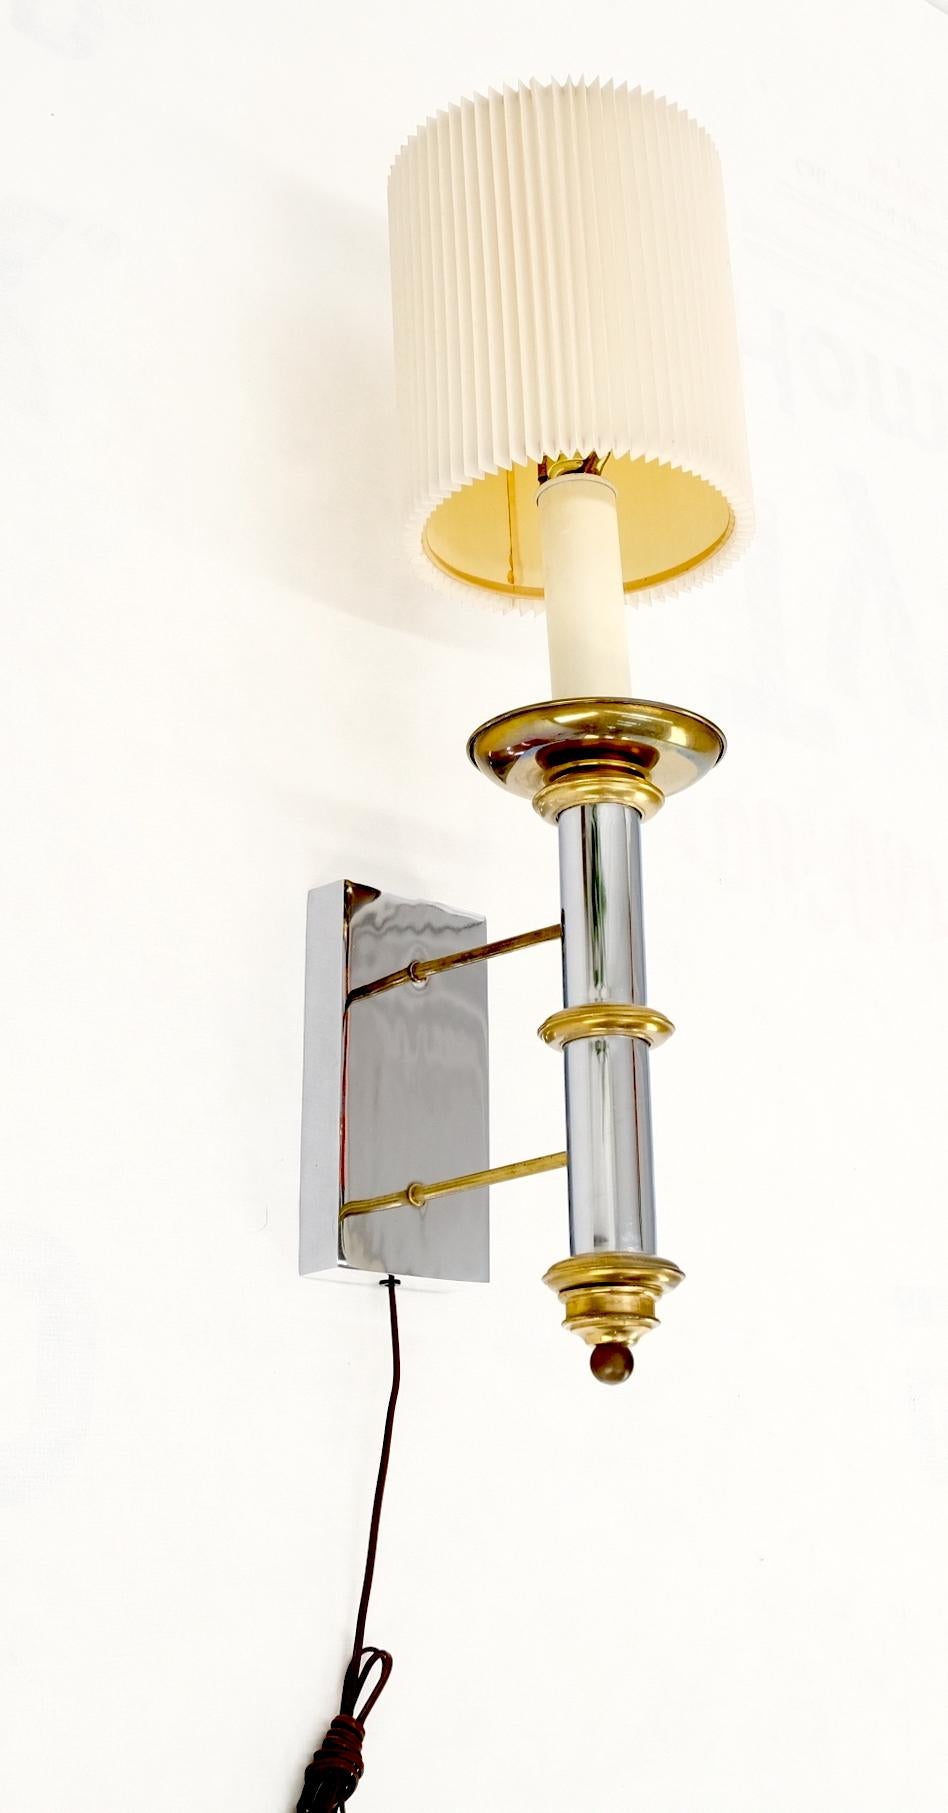 North American Fine Chrome Brass Mid Century Modern Sconce Light Fixture Lamp For Sale